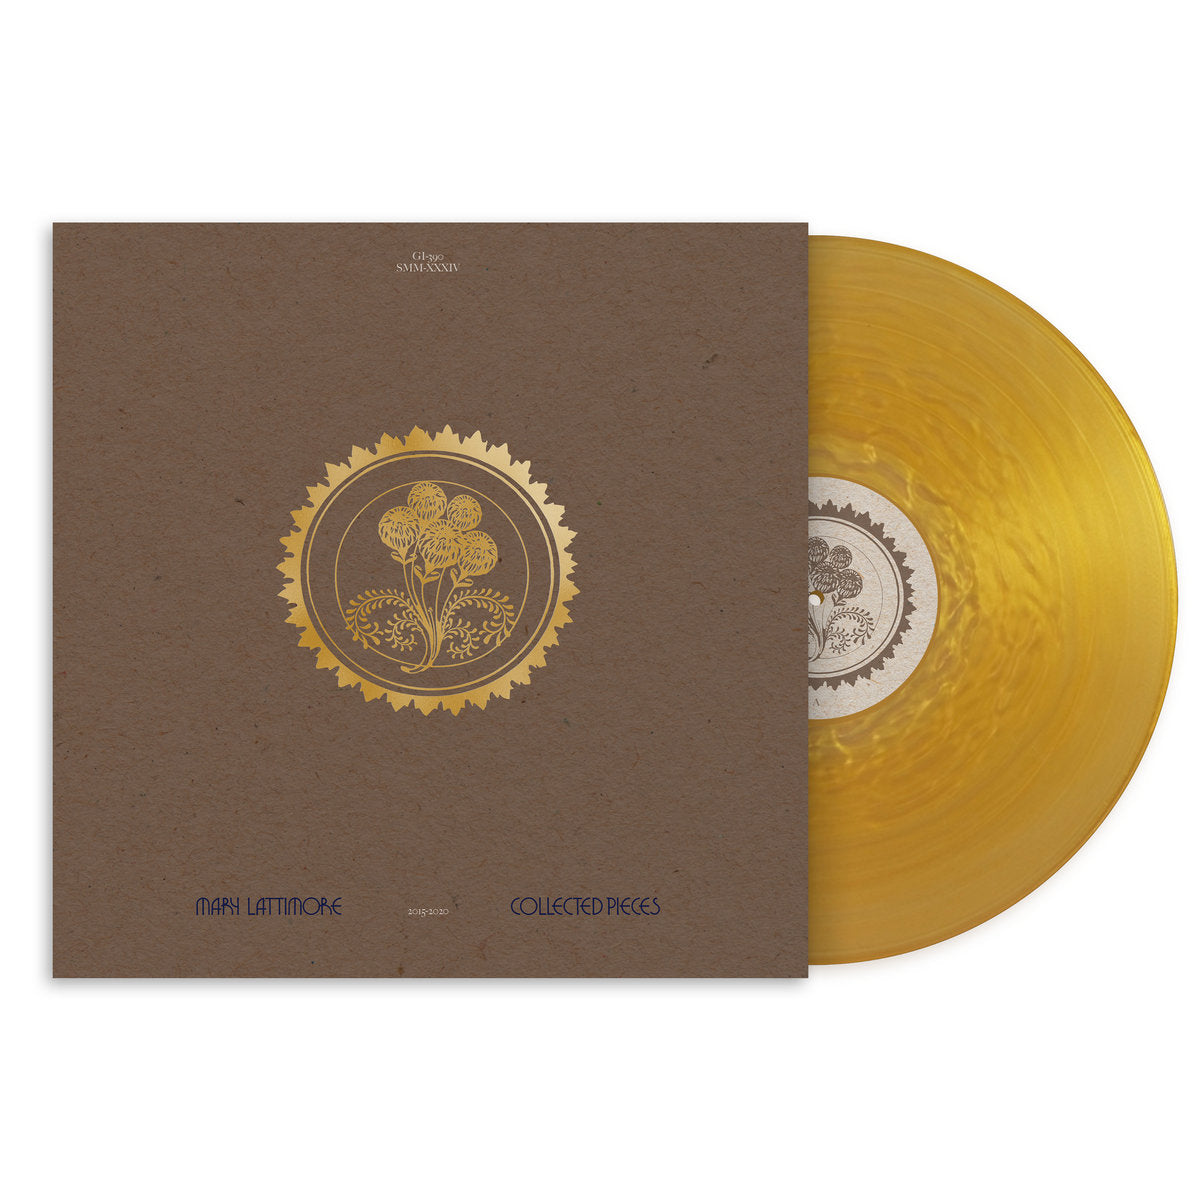 Mary Lattimore - Collected Pieces (Limited Edition on Gold-Ripped Vinyl)